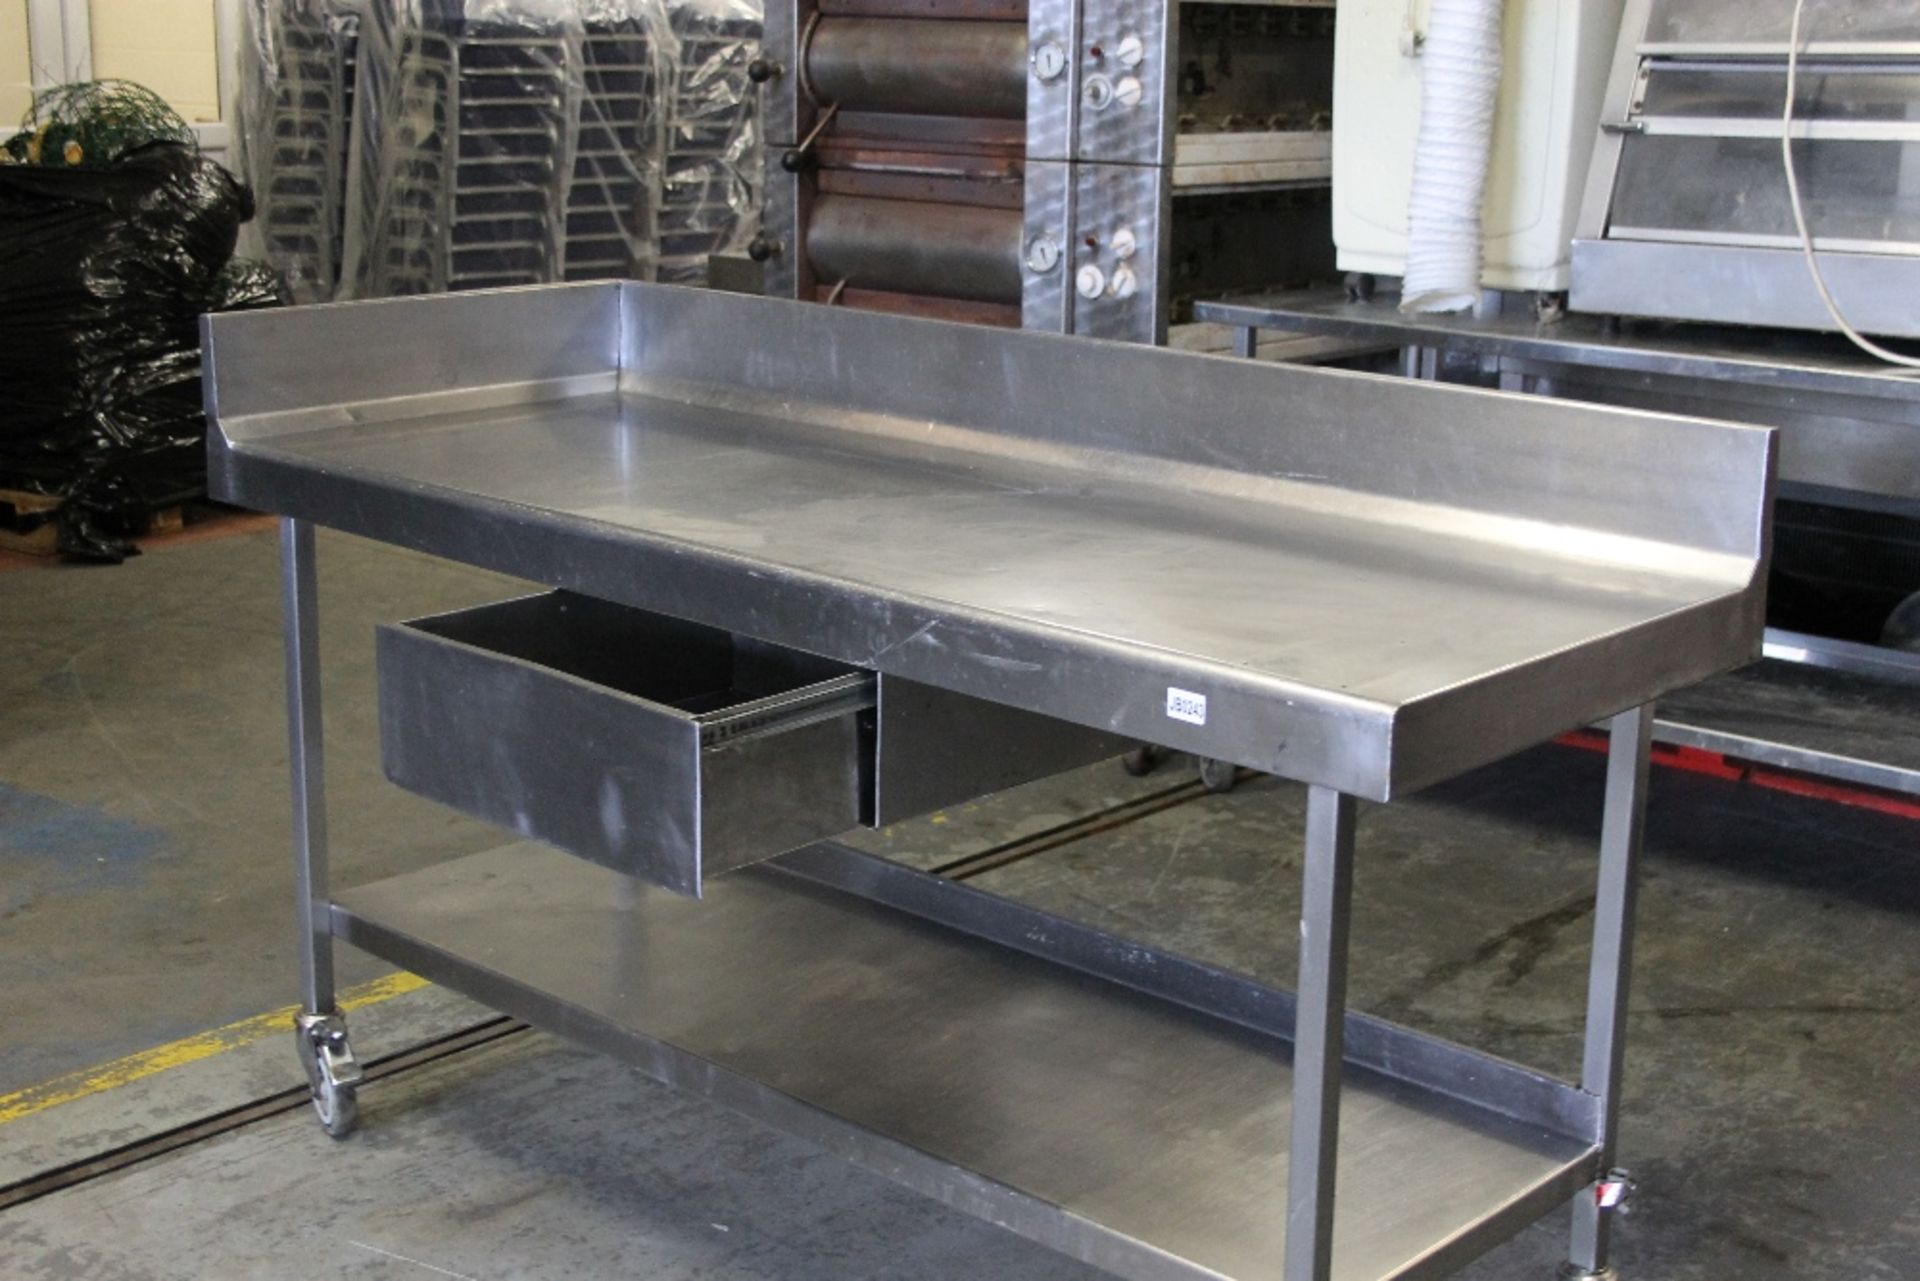 Stainless Steel Table 5ft 7” with one Drawer + Splash back - Image 3 of 3